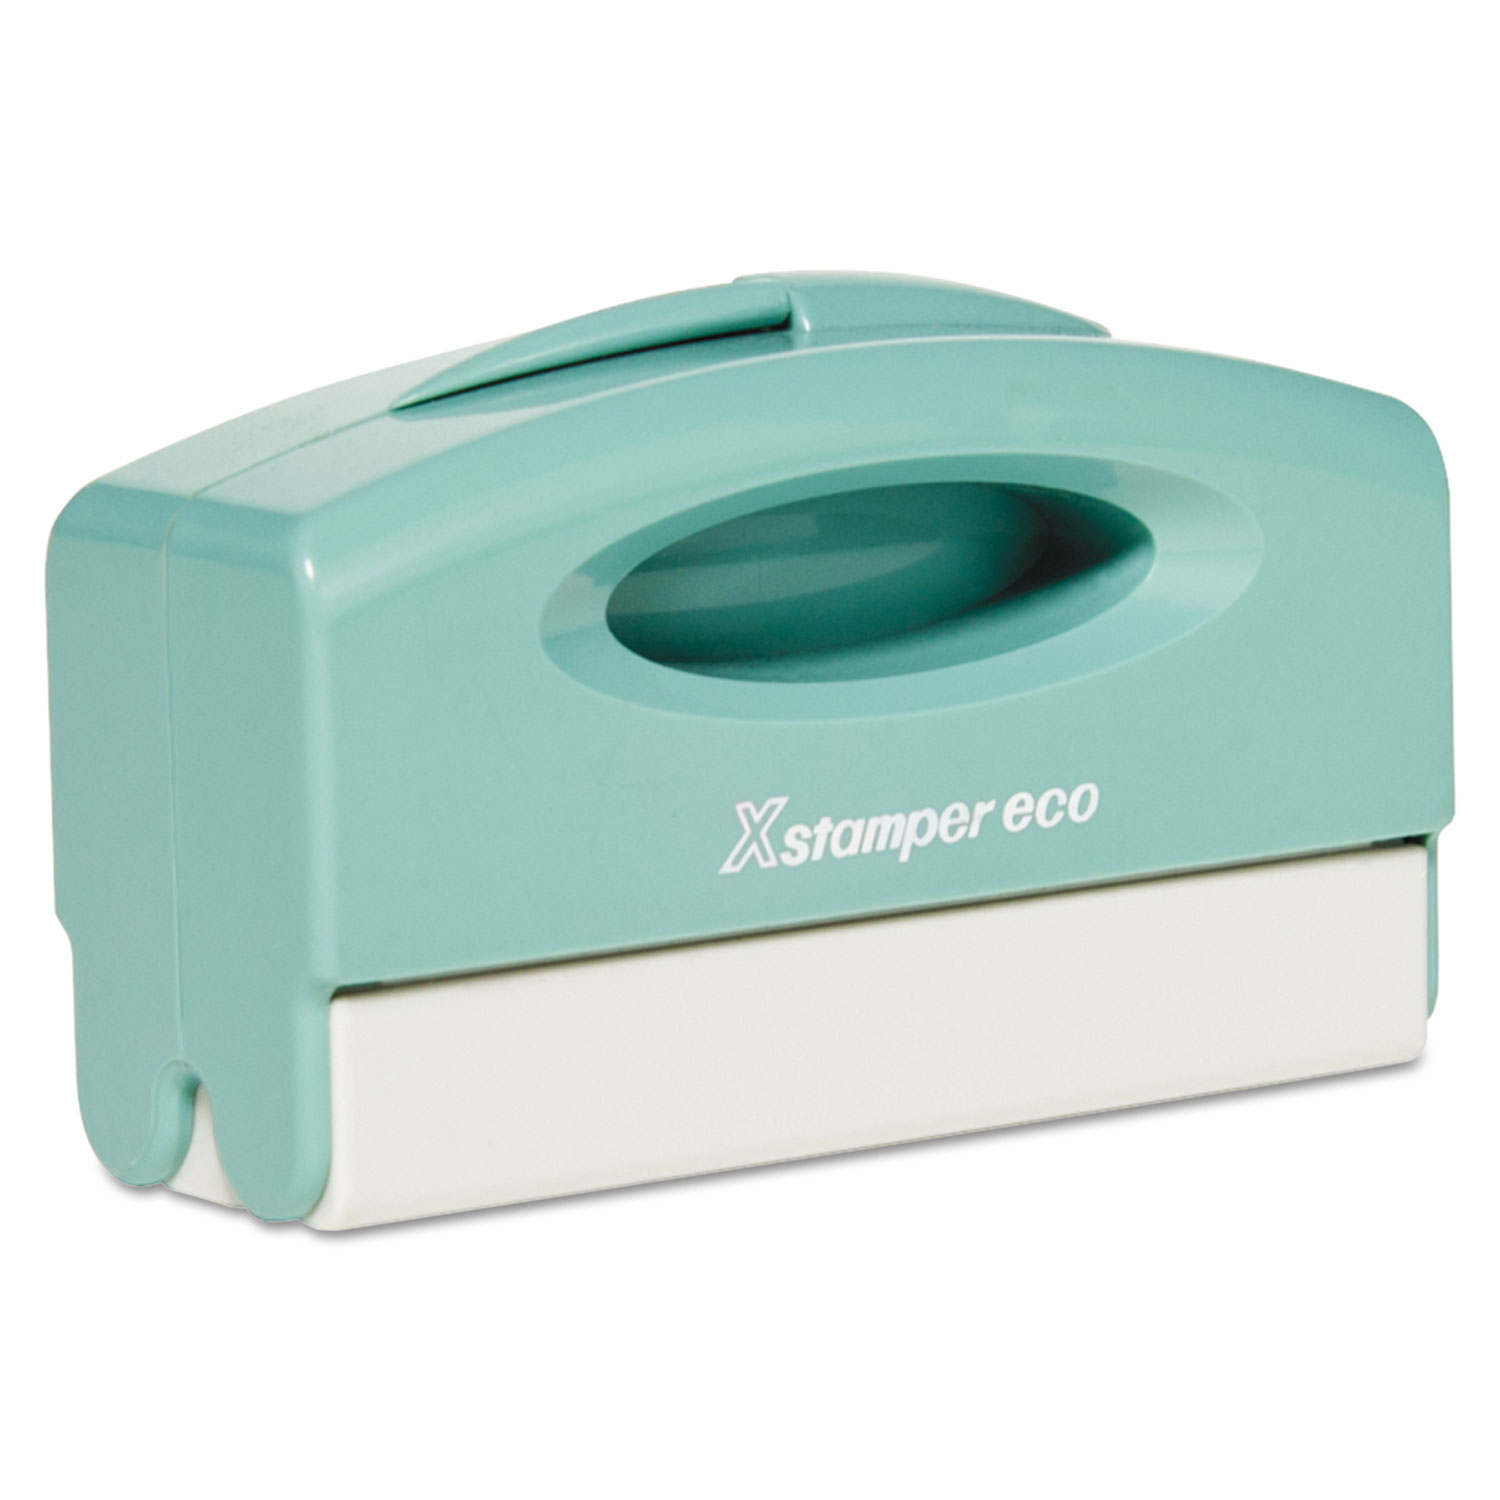  Xstamper ECO-GREEN 1XPN40 ECO Custom Message Stamp, N40, Pre-Inked/Re-Inkable (XST1XPN40) 